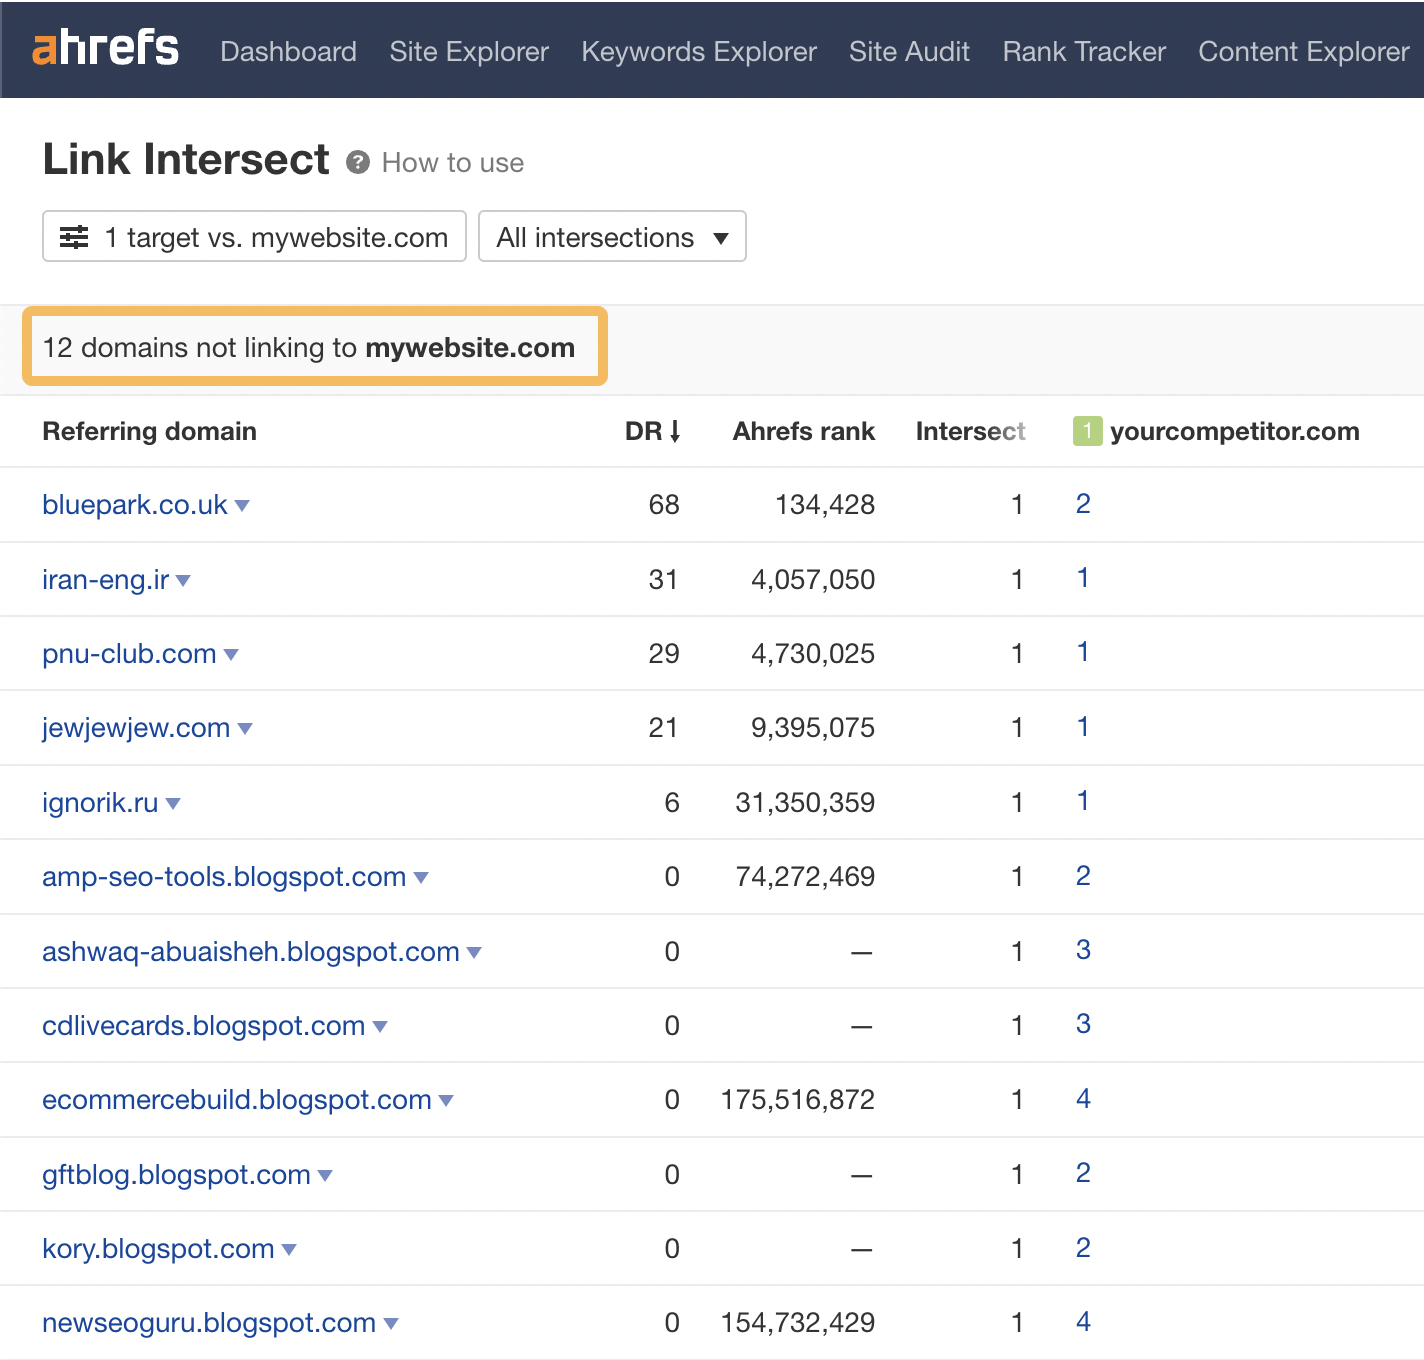 Domains not linking to mywebsite.com, via Ahrefs' Link Intersect tool
